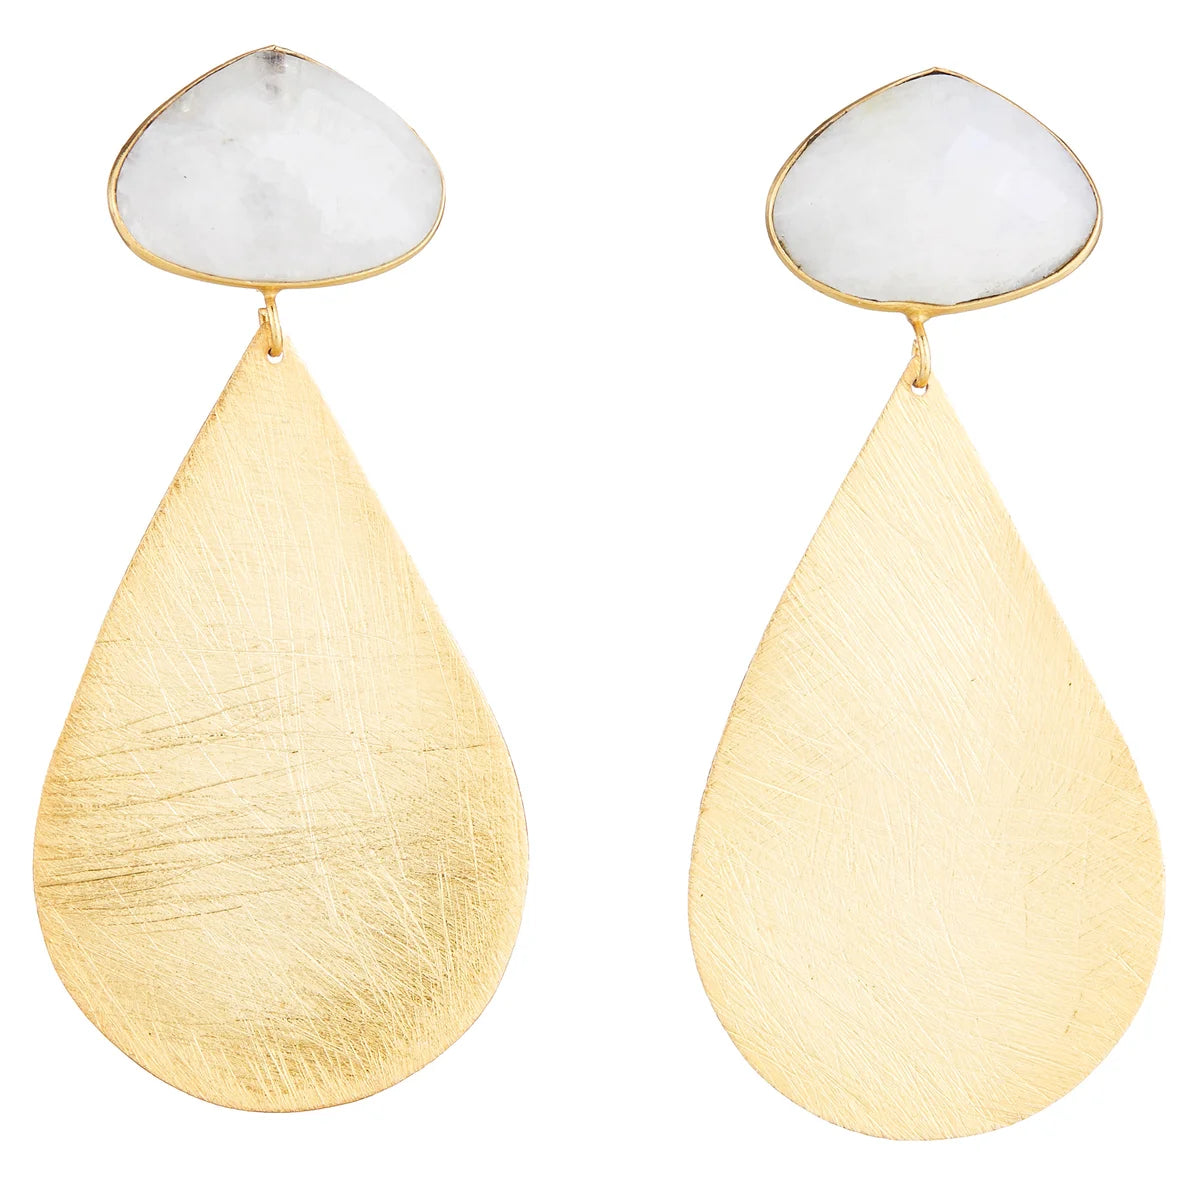 MOONSTONE WITH LARGE GOLD TEARDROP EARRINGS - Molly's! A Chic and Unique Boutique 